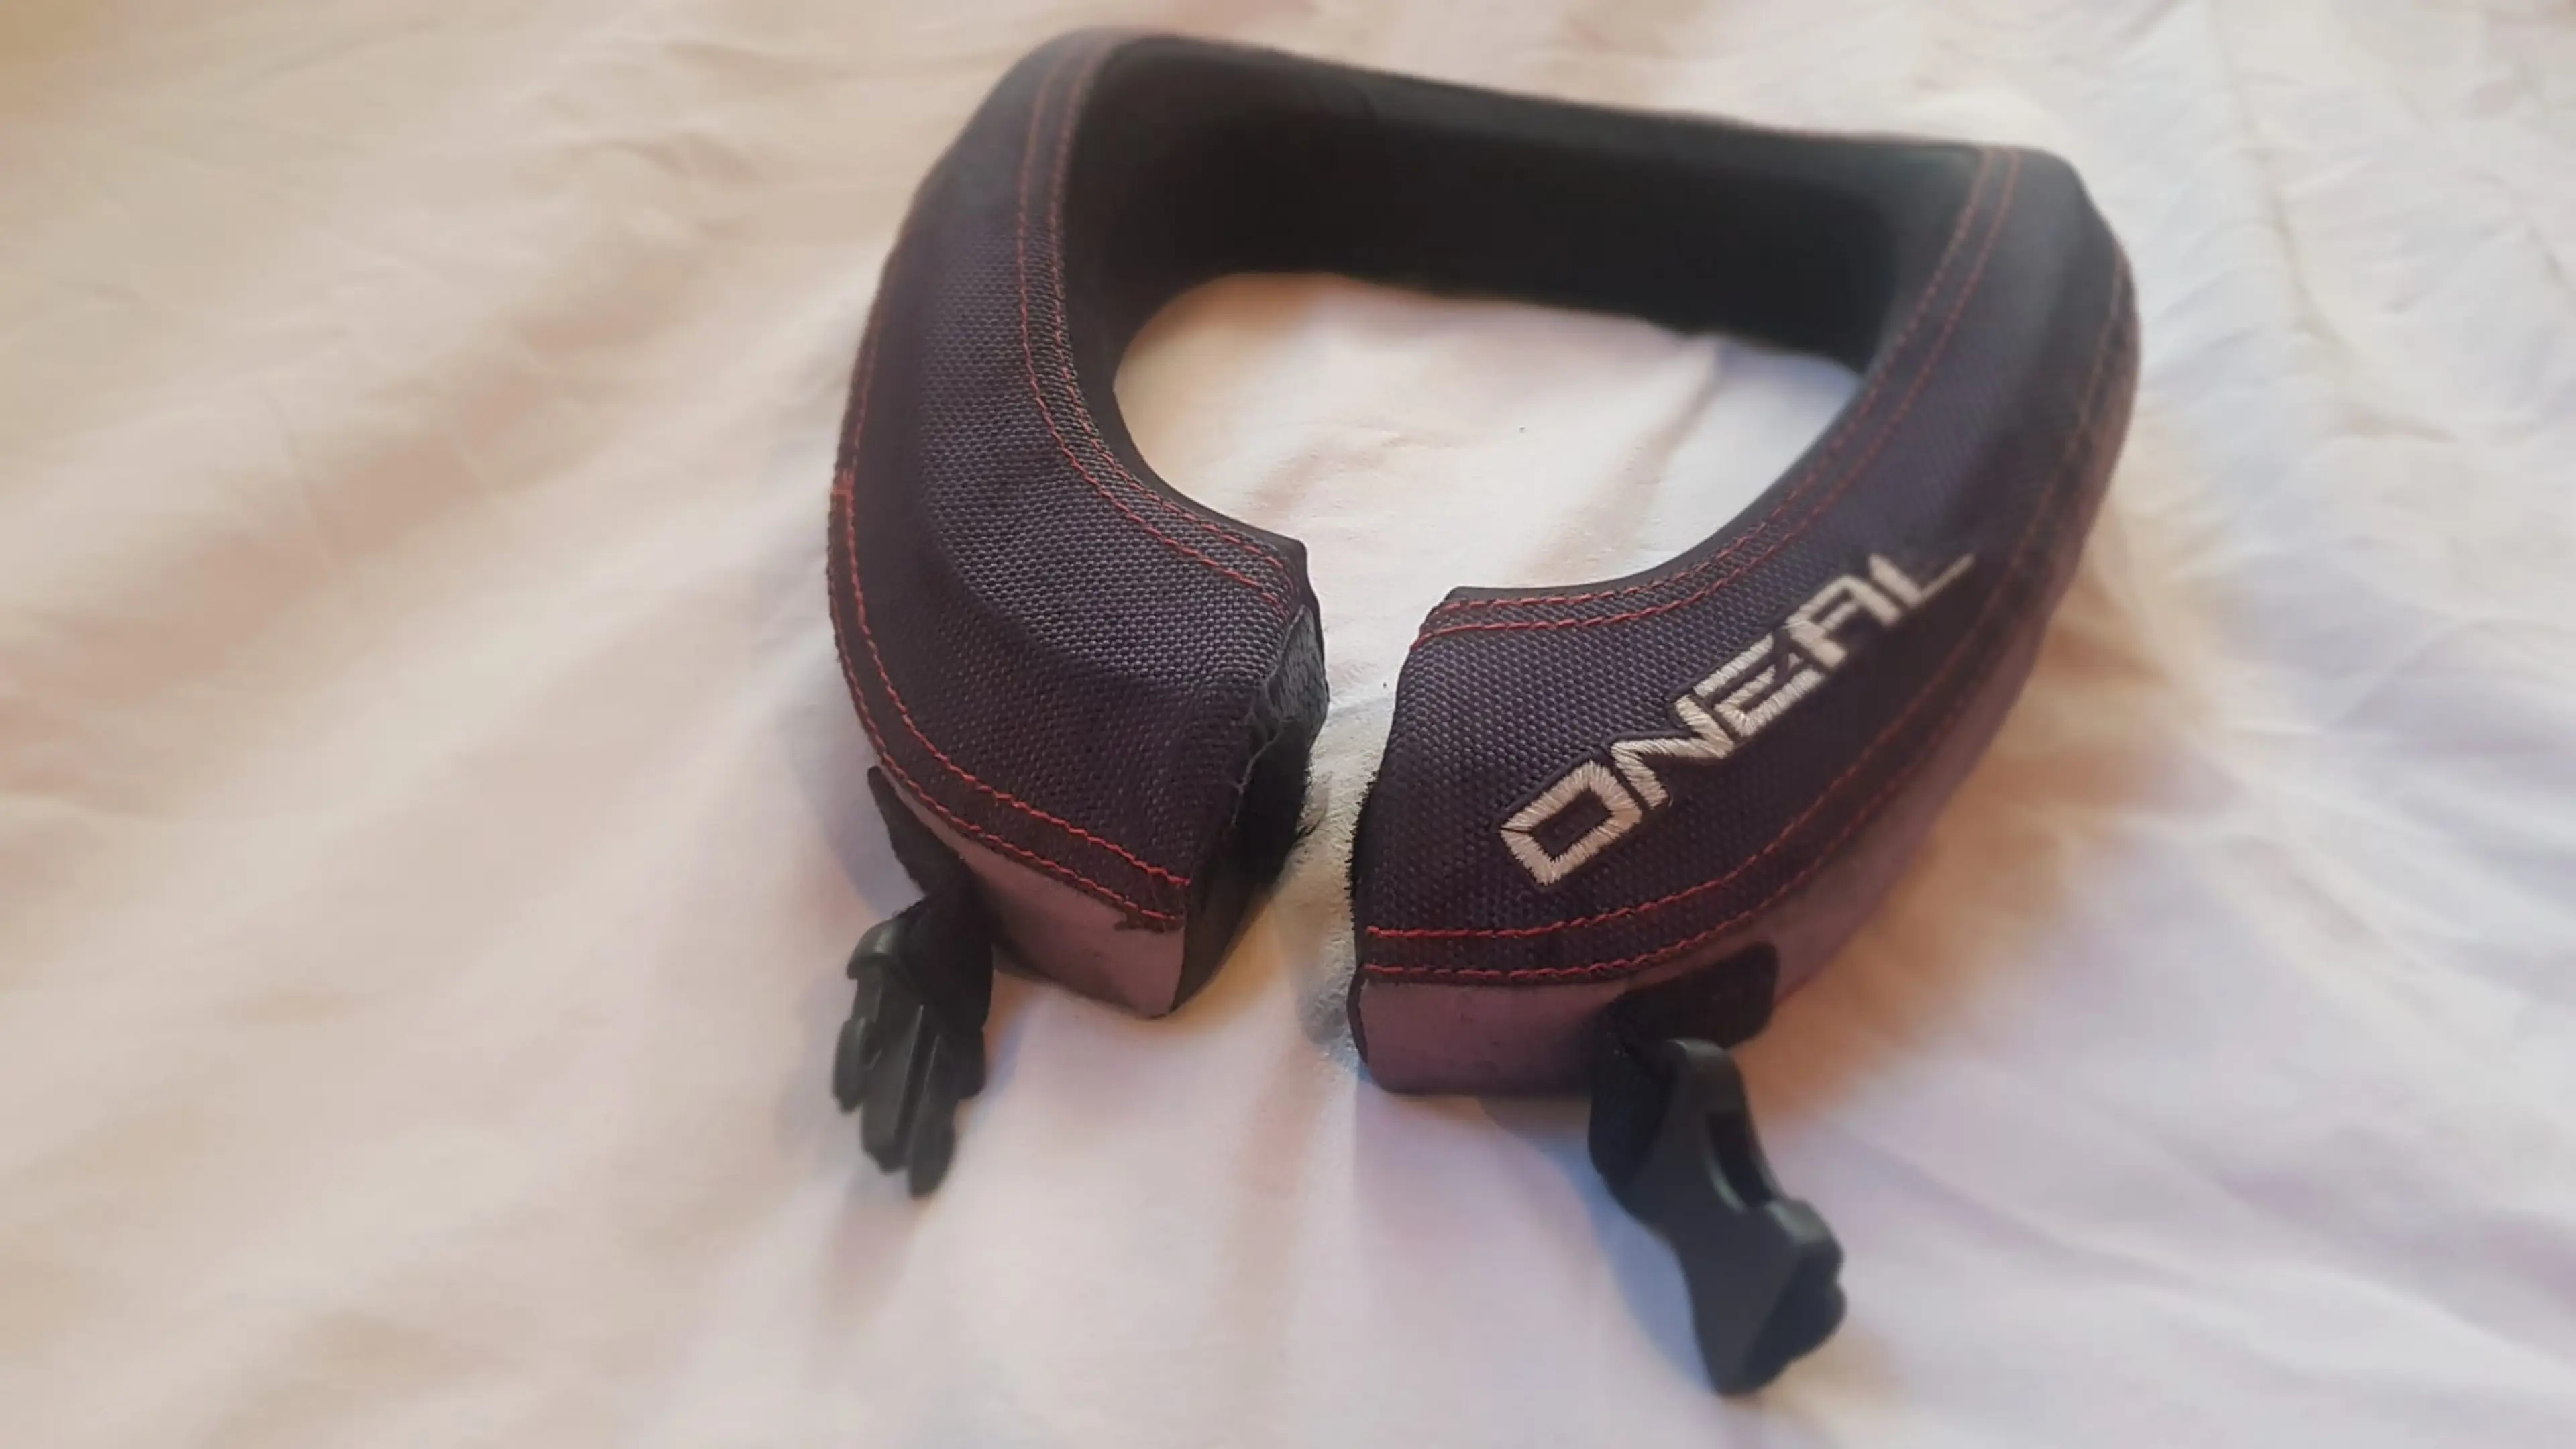 2. Neck brace Oneal